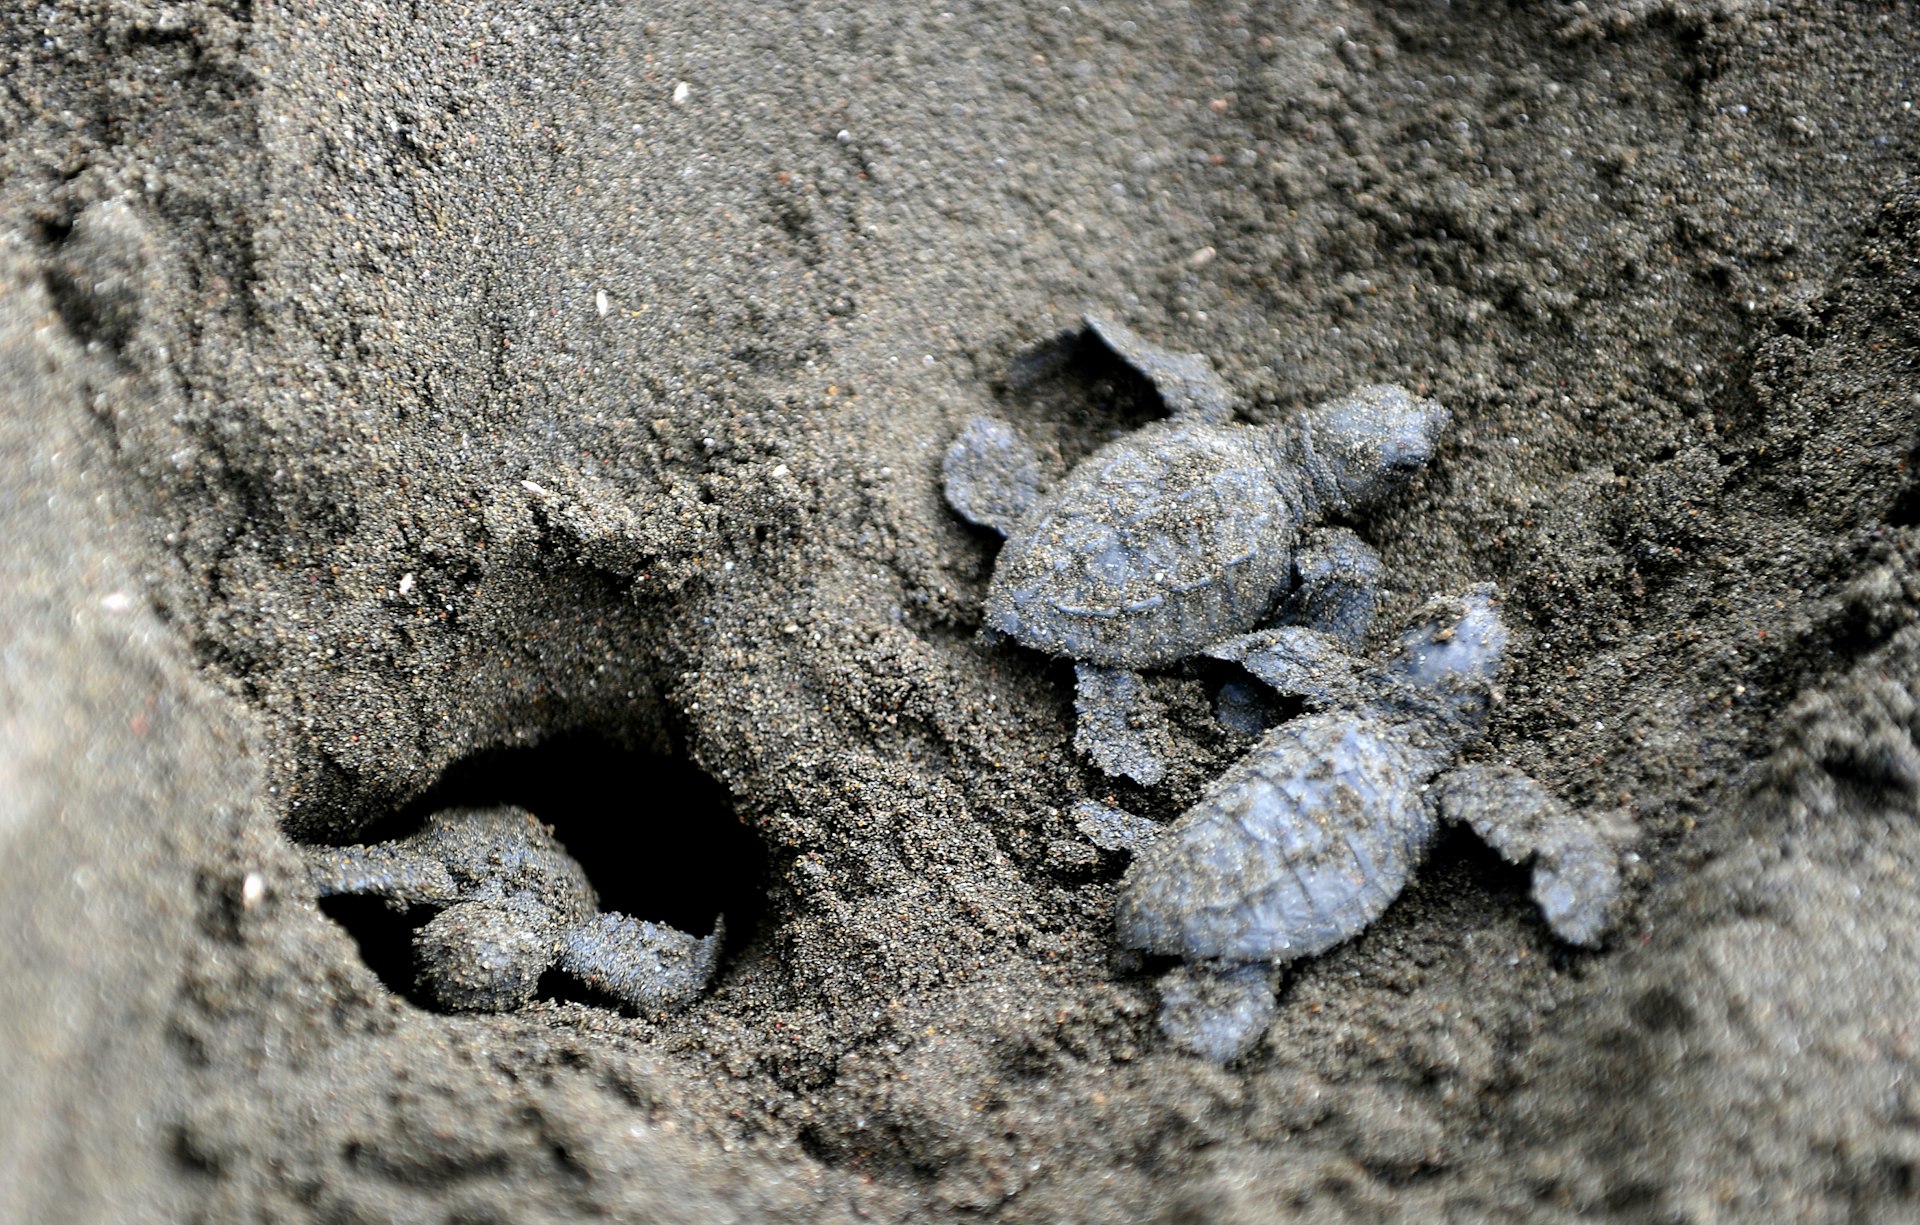  Baby olive ridley sea turtles on Ostional beach. Image by Yuri Cortez / AFP / Getty Images